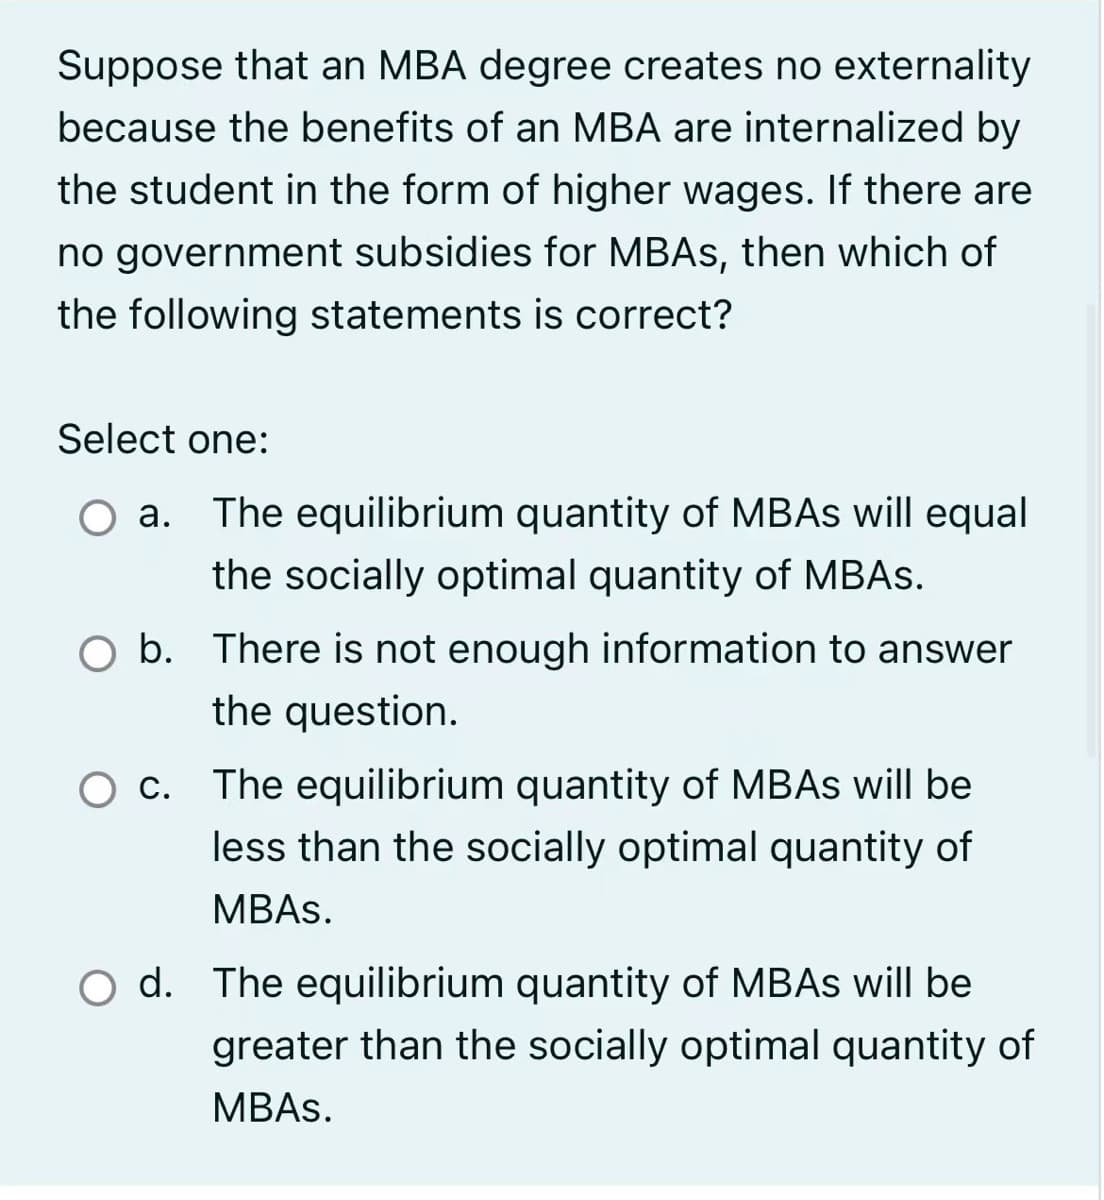 Suppose that an MBA degree creates no externality
because the benefits of an MBA are internalized by
the student in the form of higher wages. If there are
no government subsidies for MBAS, then which of
the following statements is correct?
Select one:
a. The equilibrium quantity of MBAs will equal
the socially optimal quantity of MBAs.
b. There is not enough information to answer
the question.
O c. The equilibrium quantity of MBAs will be
less than the socially optimal quantity of
MBAS.
d. The equilibrium quantity of MBAs will be
greater than the socially optimal quantity of
MBAS.